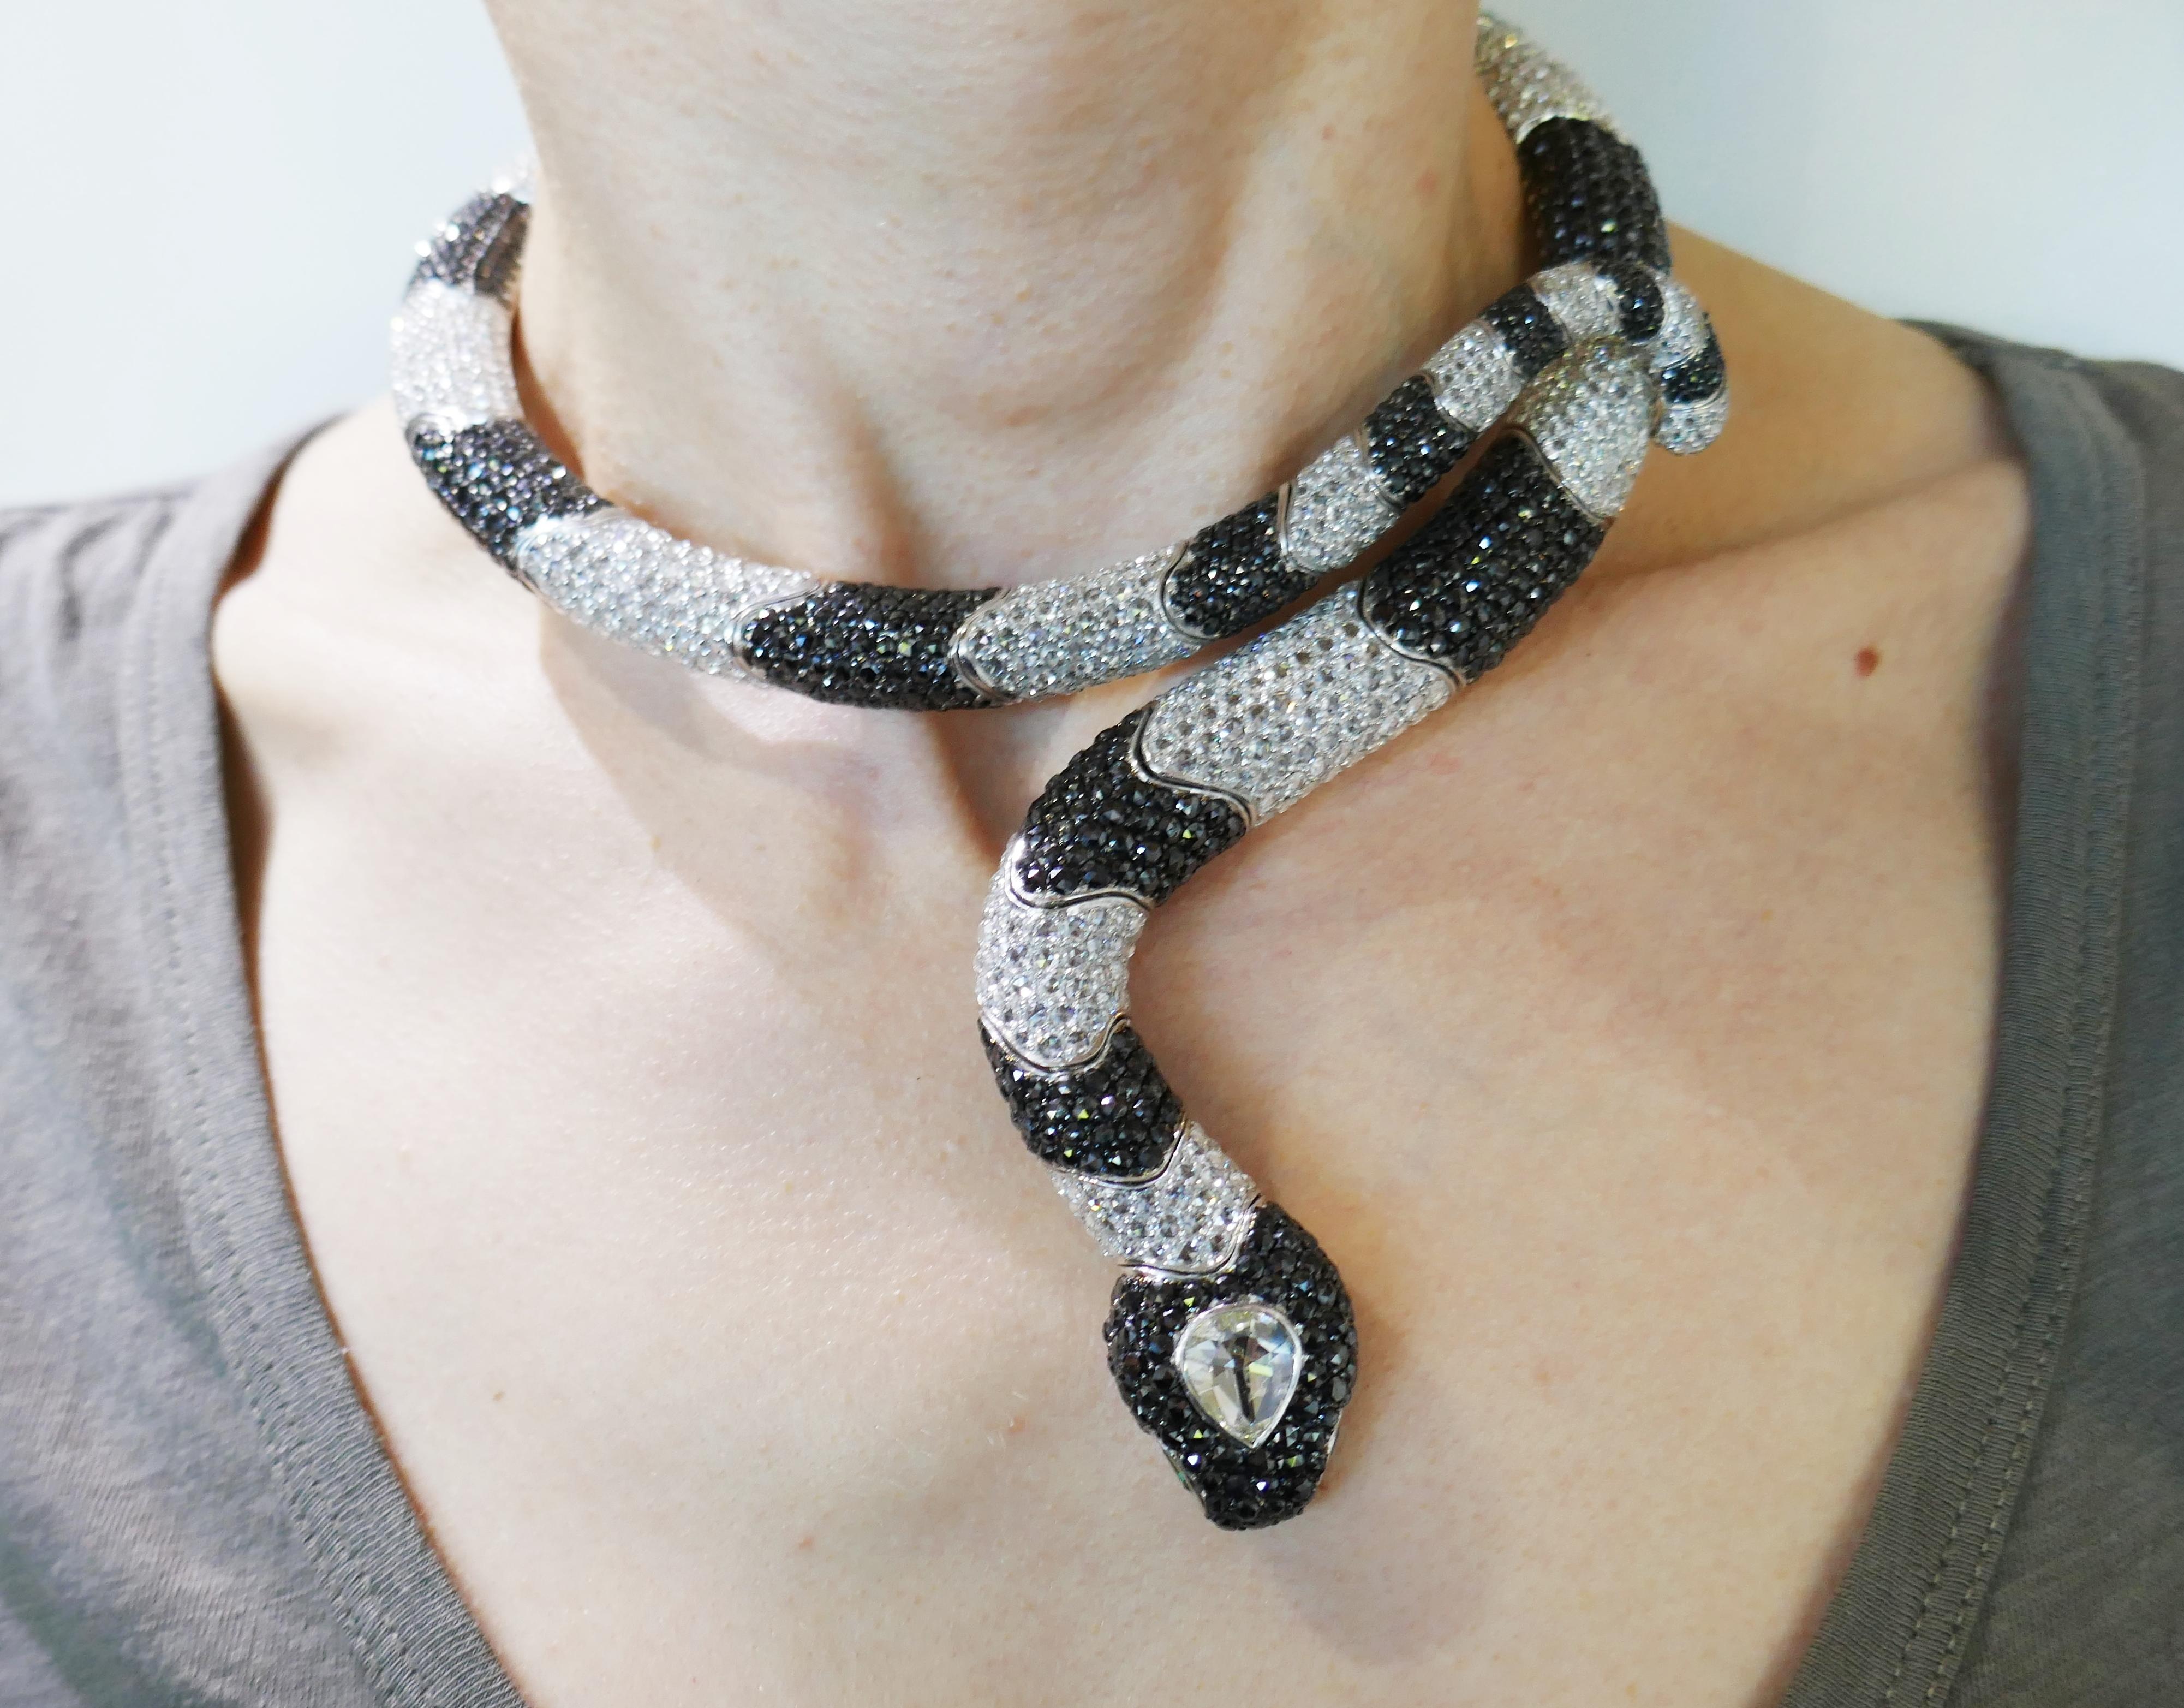 Stunning one-of-a-kind snake necklace created by De Grisogono, a Swiss luxury jewelry house. Dramatic and bold, the necklace is a great addition to your jewelry collection. 
The necklace is made of 18 karat white gold and encrusted with rose cut